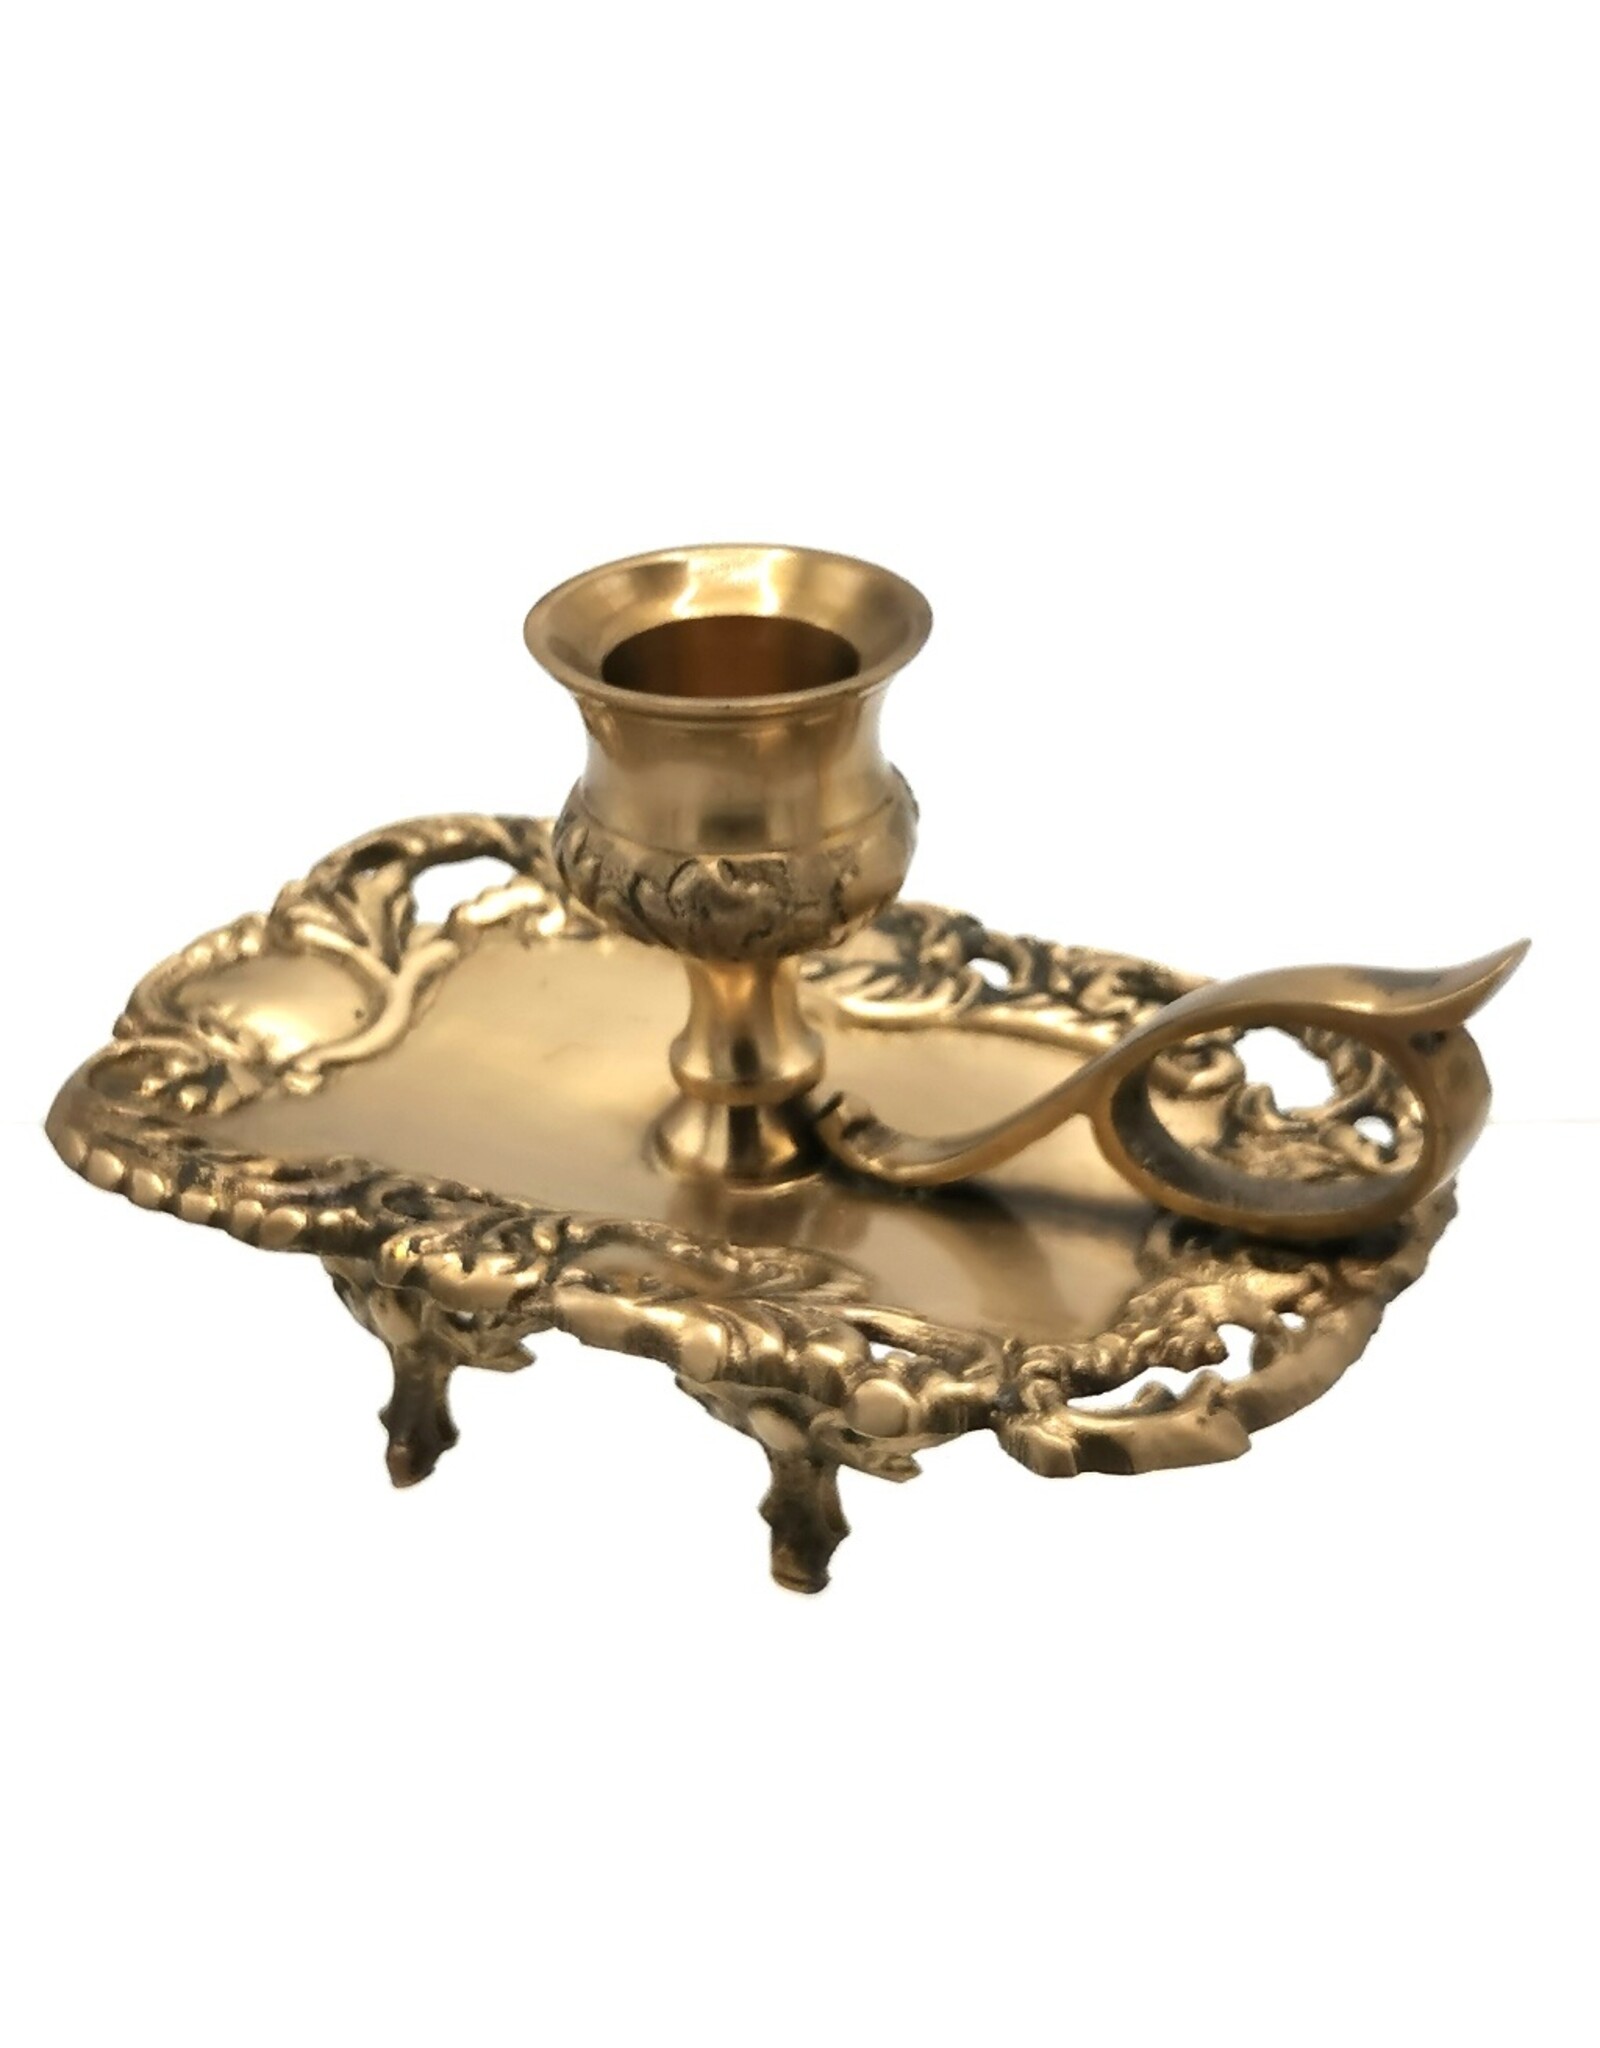 Barok Giftware & Lifestyle - Baroque Candlestick with ear handle - brass, copper colored